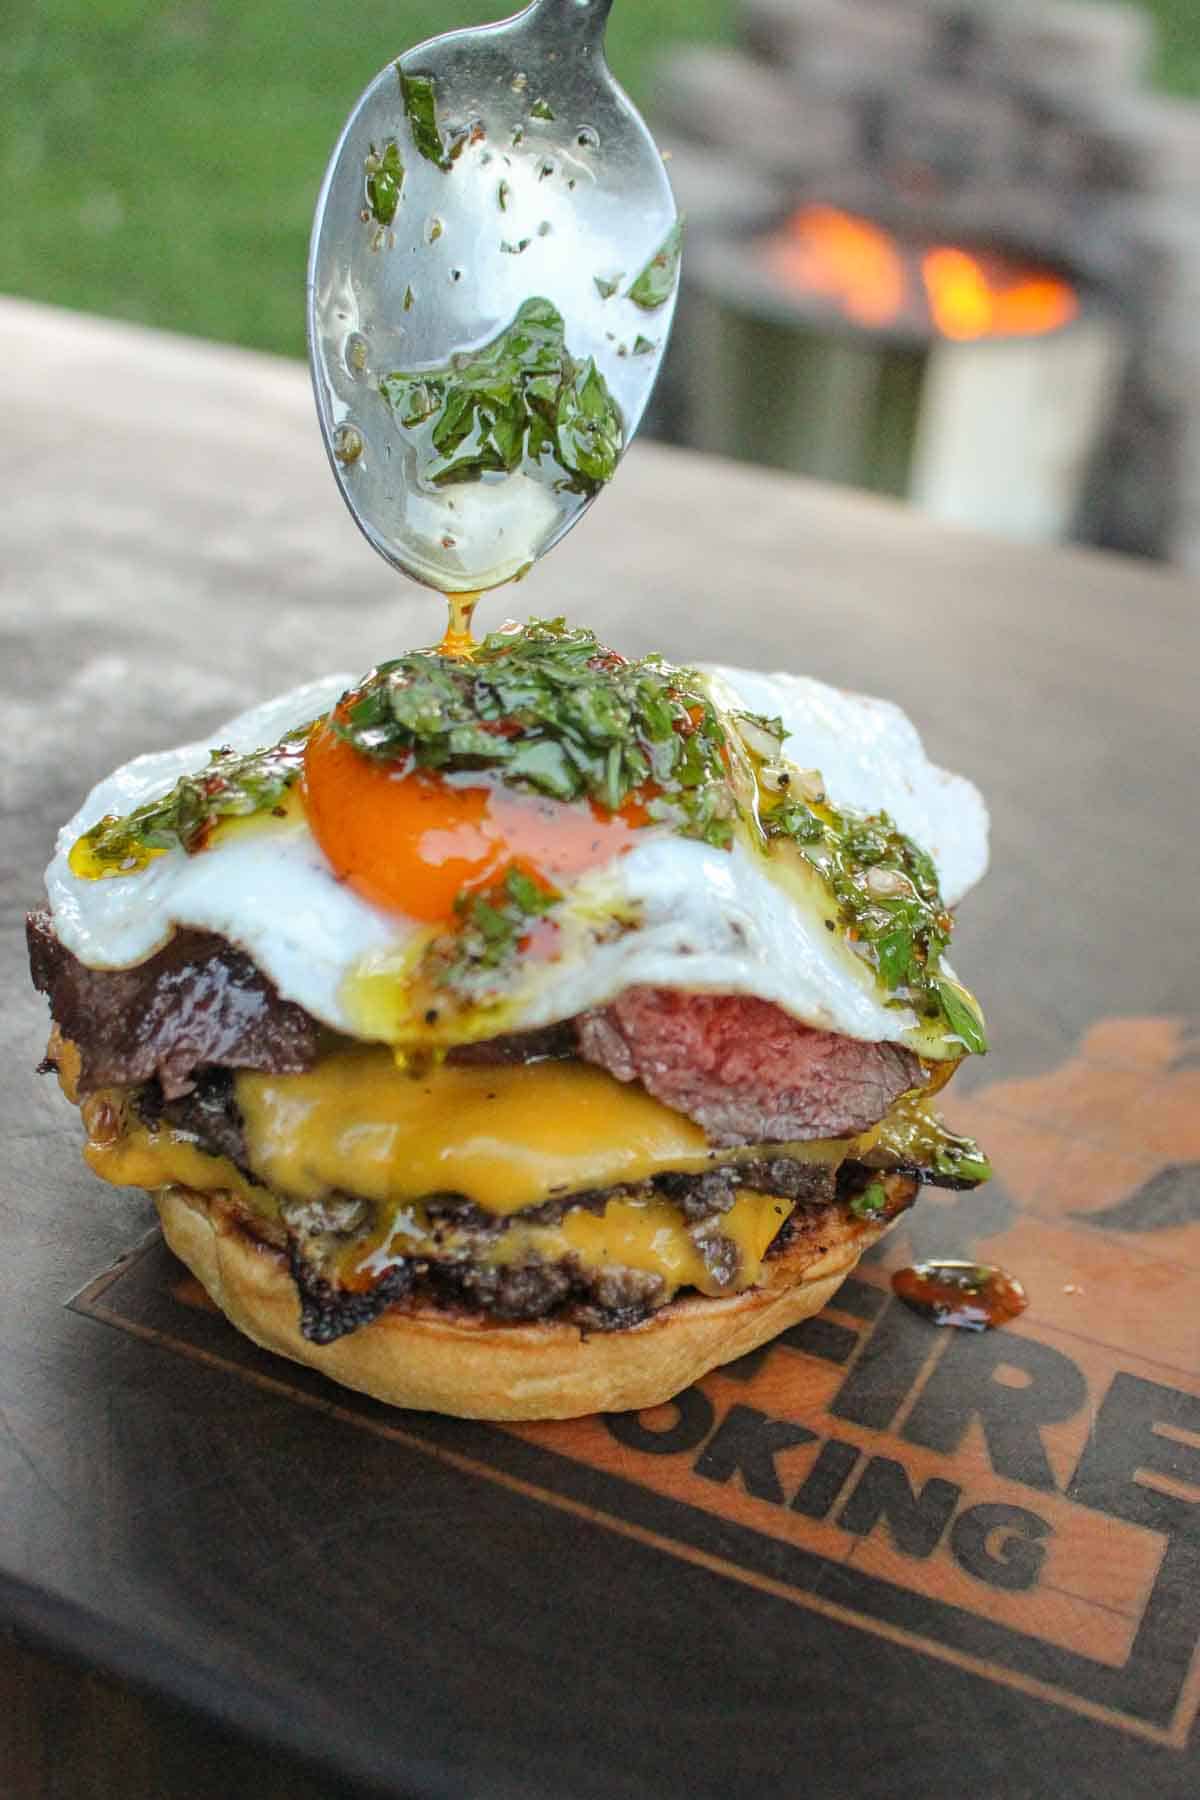 The chimichurri sauce is drizzled over the fried egg. 